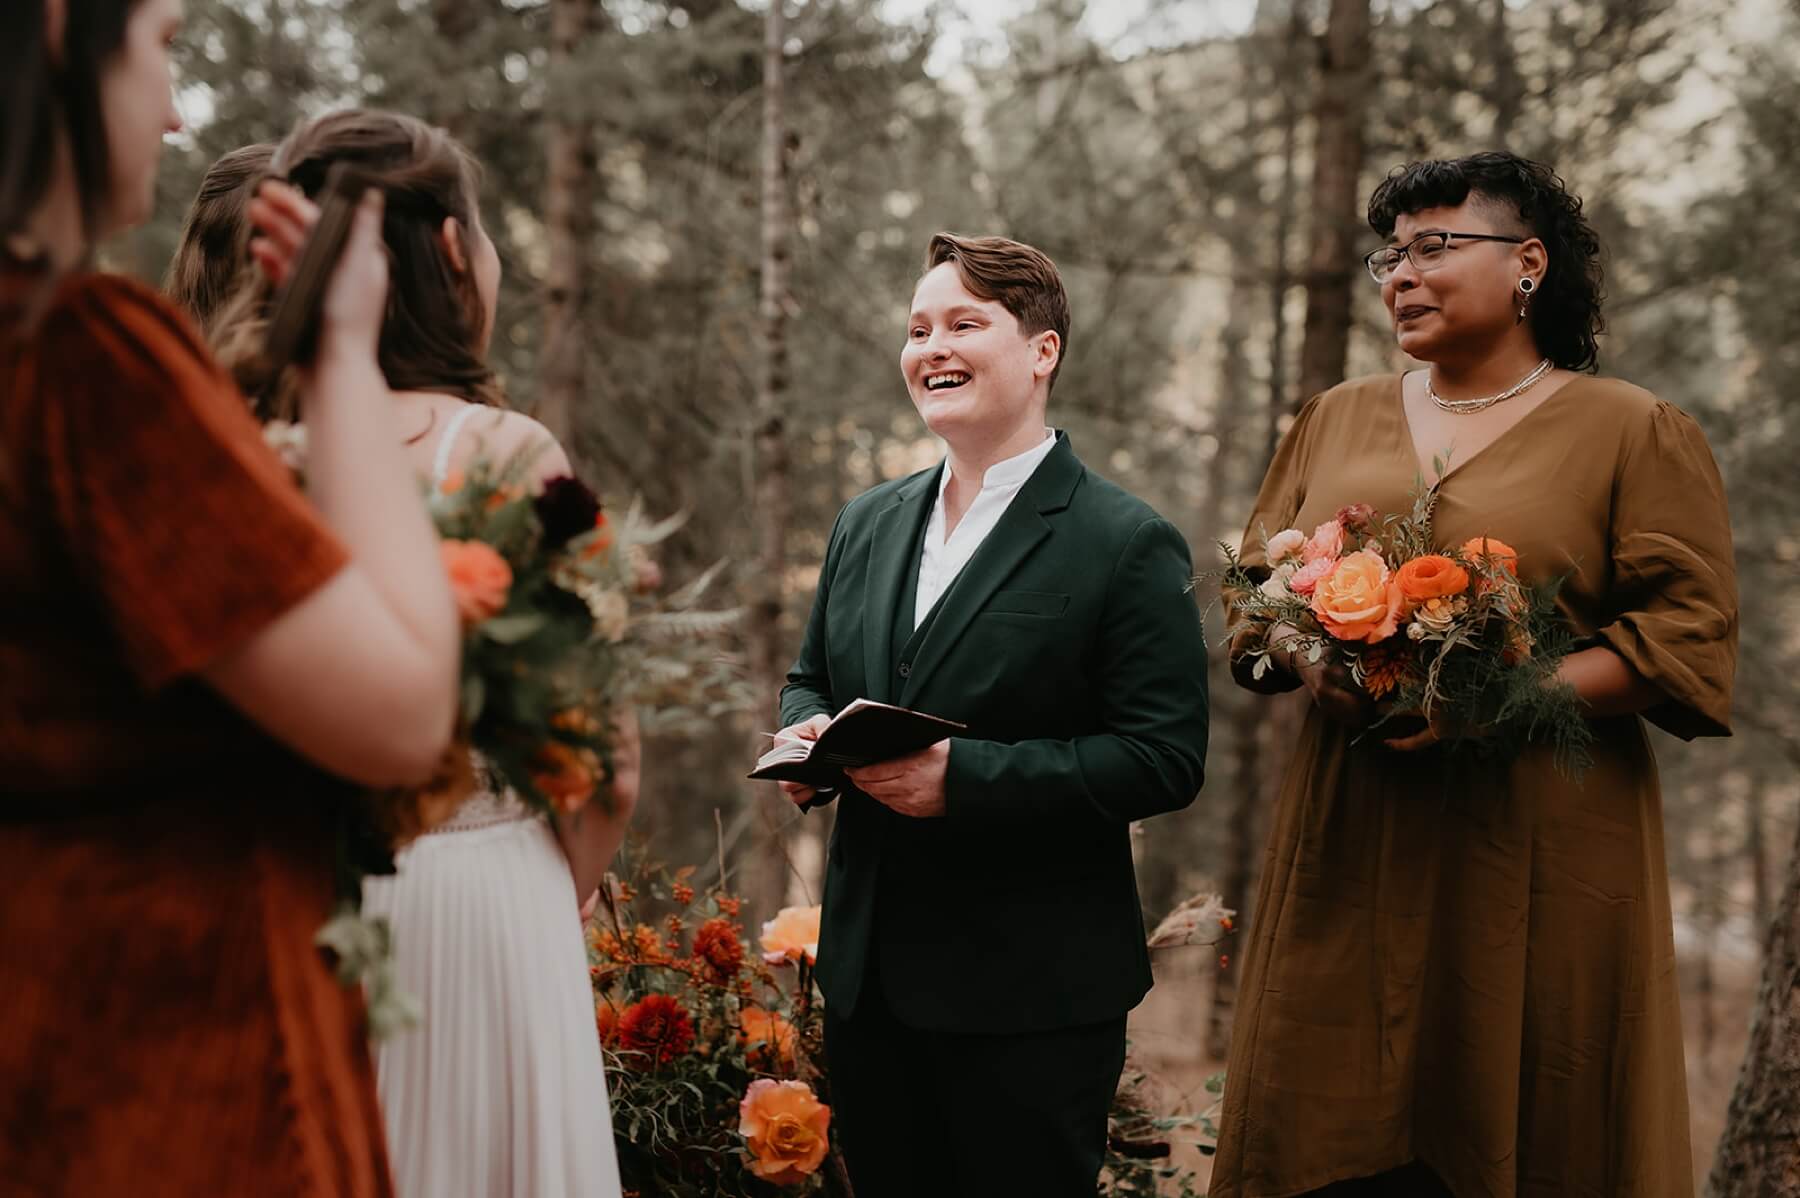 Maid of honor standing next to couple as they exchange vows